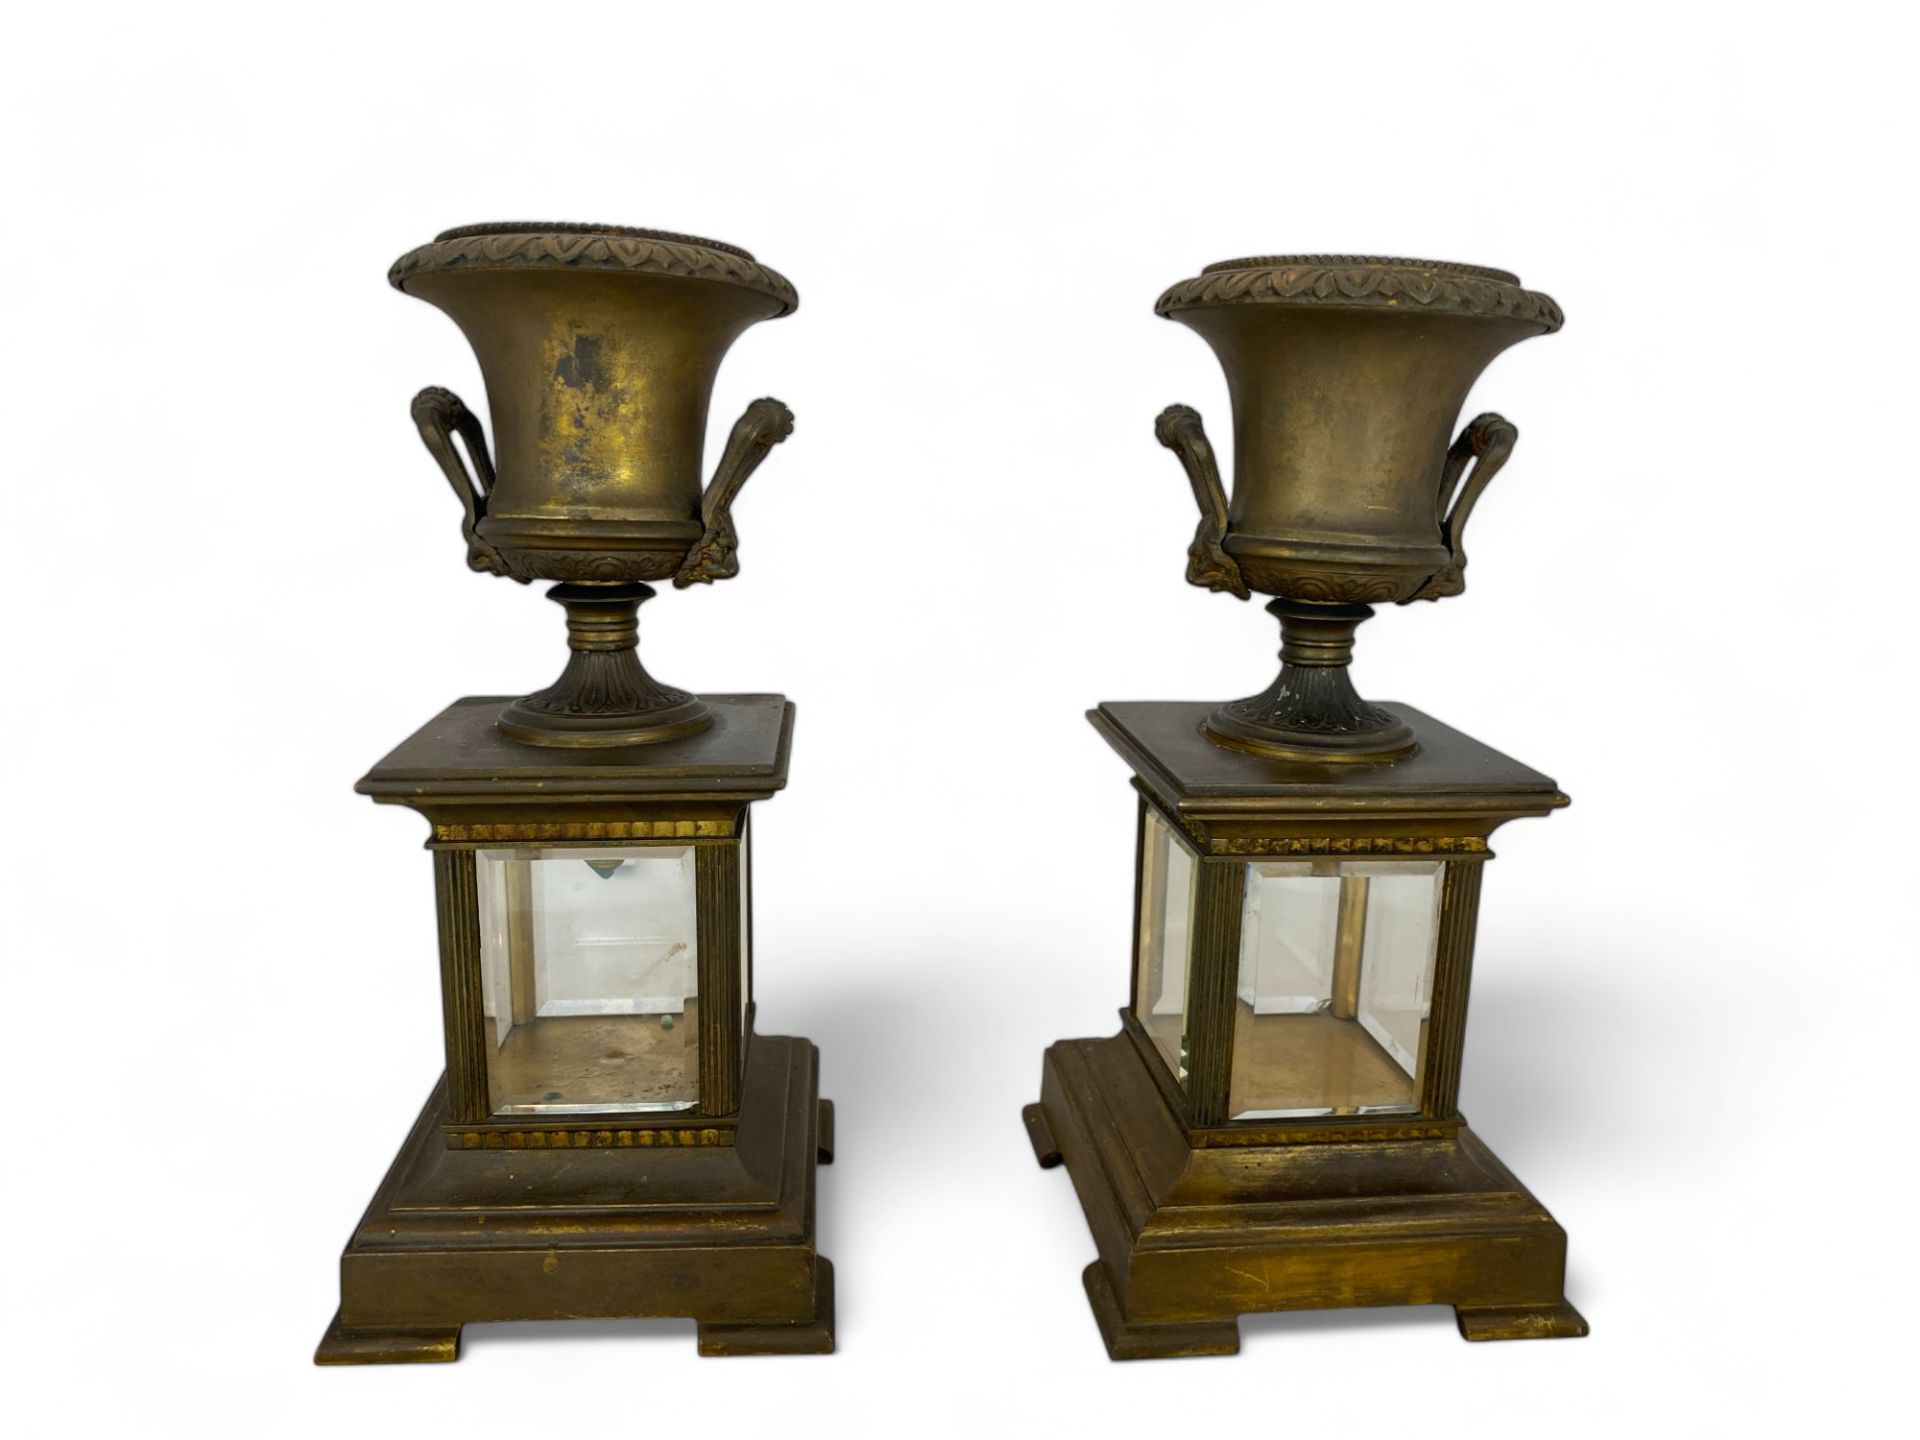 A pair of 19th century gilt bronze chimney ornaments - Image 3 of 12